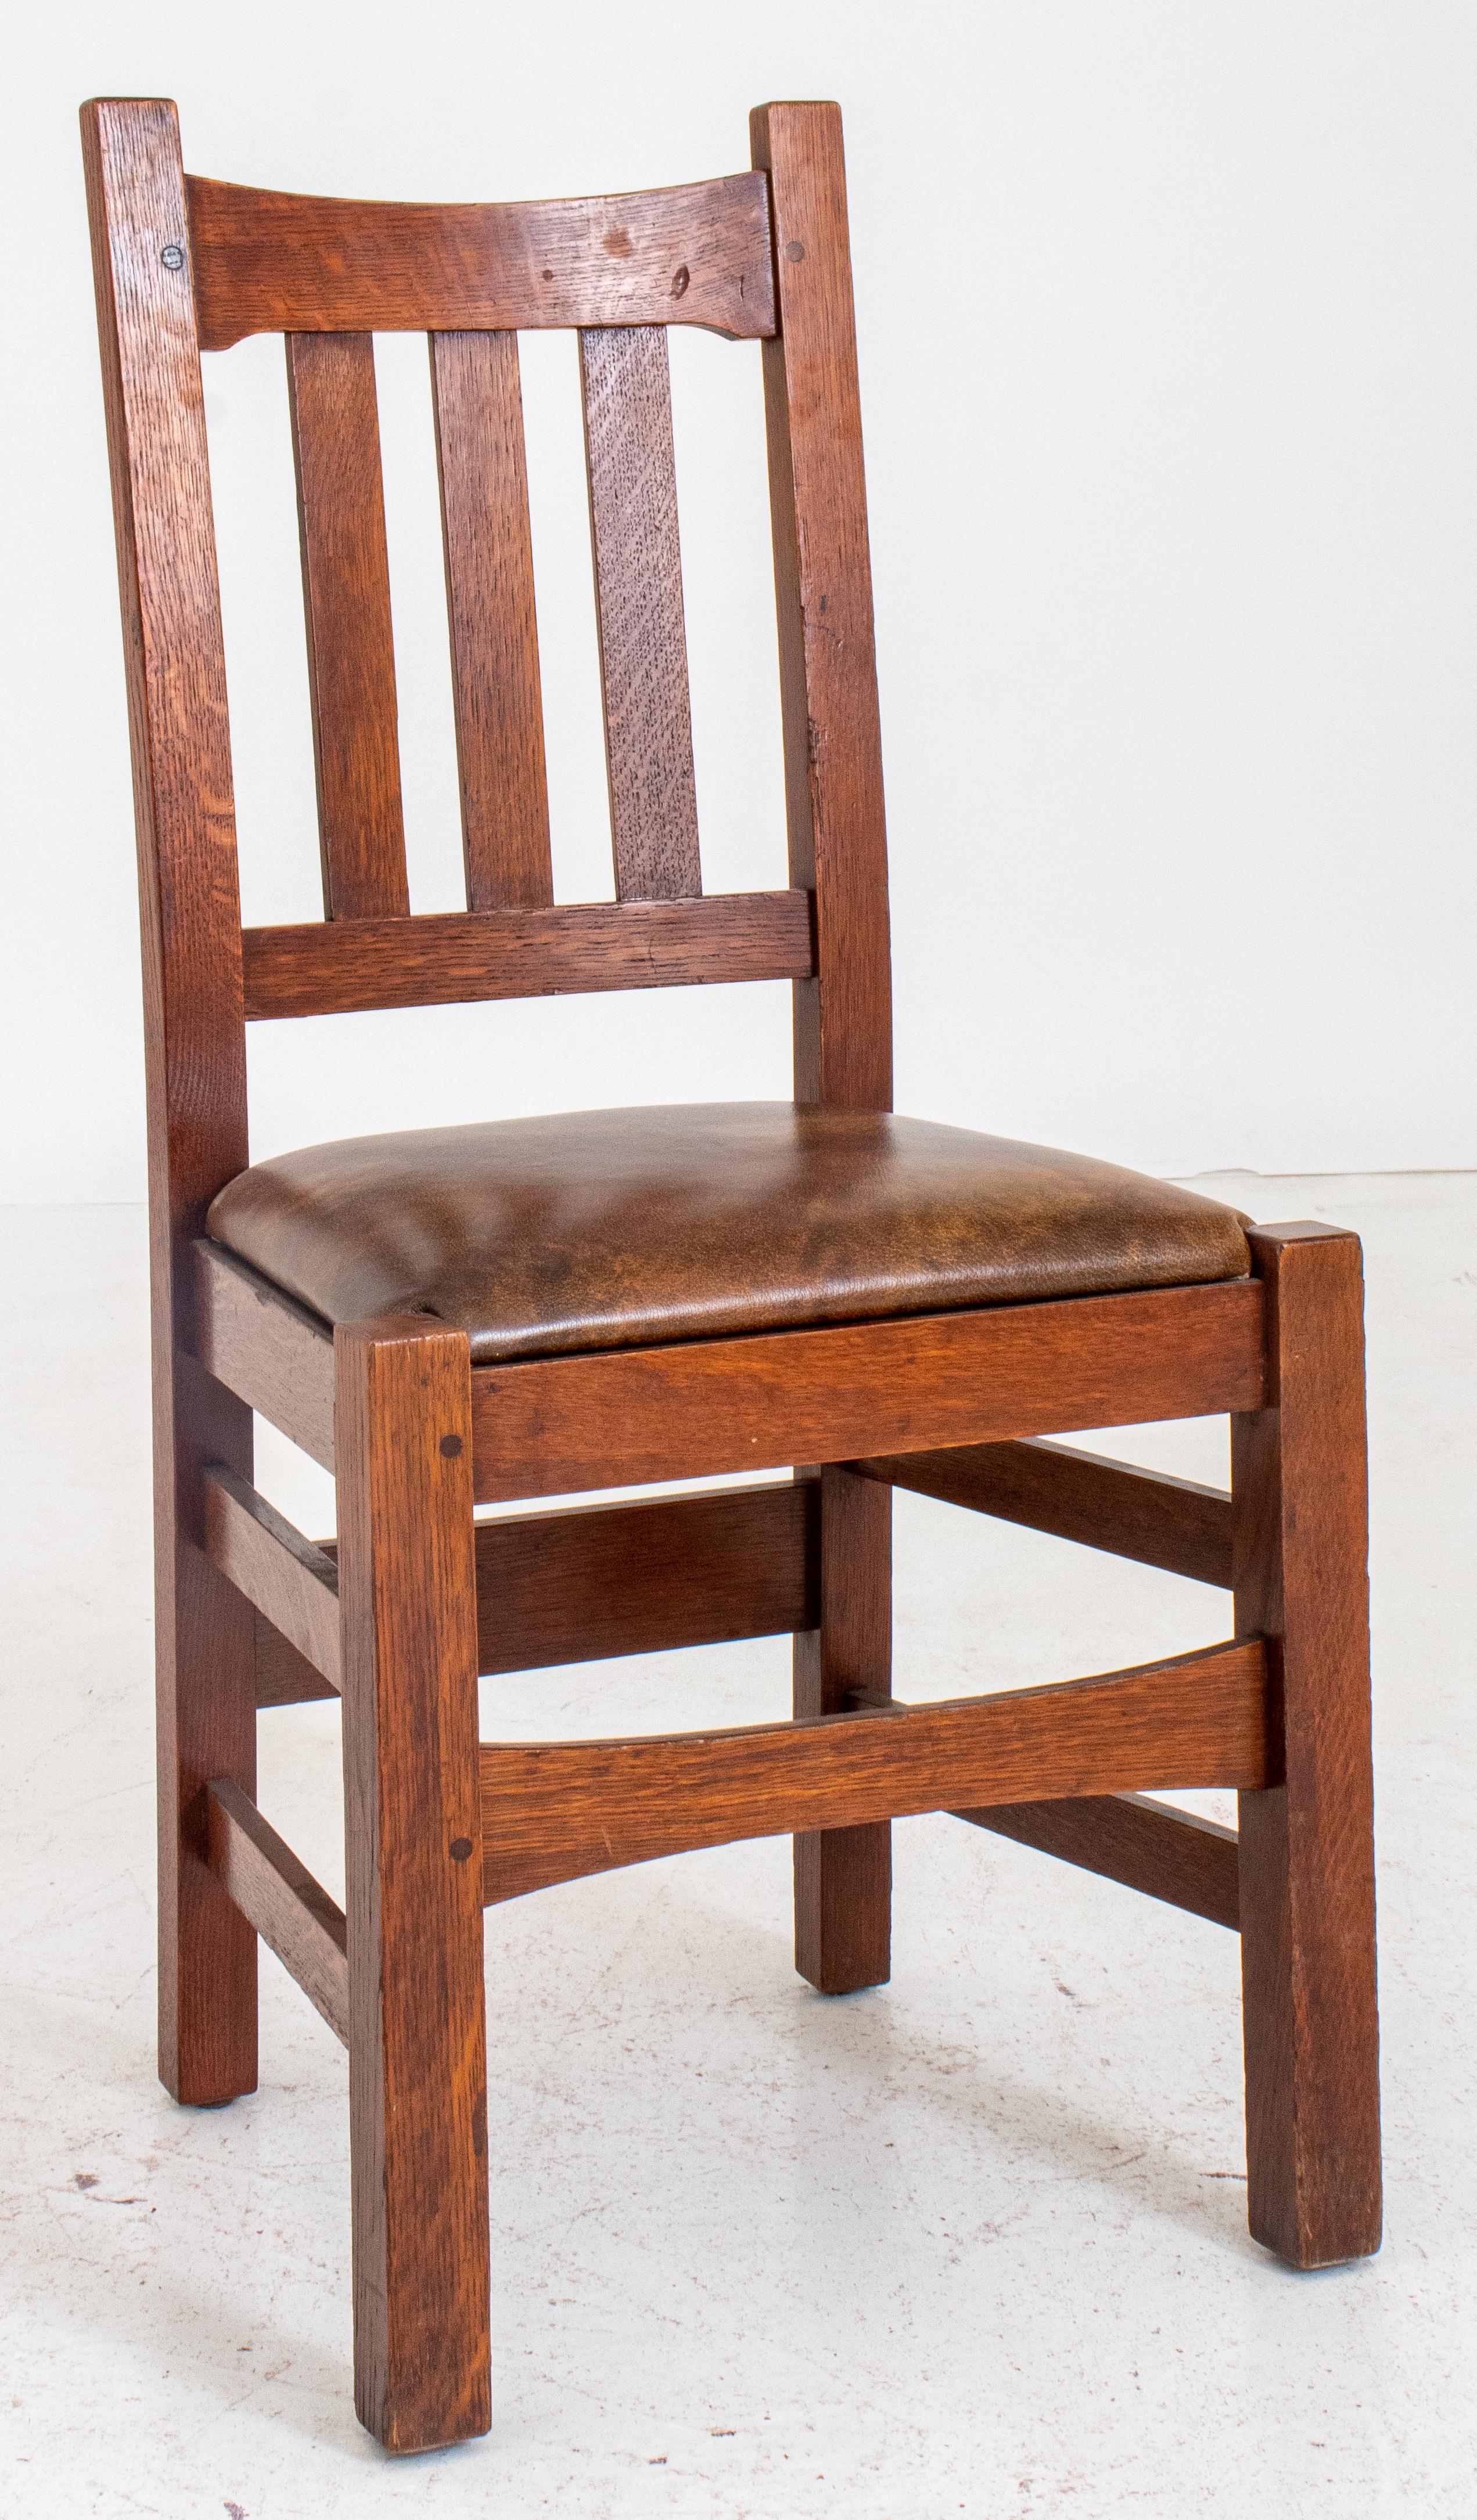 Arts & Crafts quarter-sawn oak side chair in the manner of Gustav Stickley and Stickley Brothers, with slatted rectangular back above a square leather-upholstered seat on square legs. Measures: 35